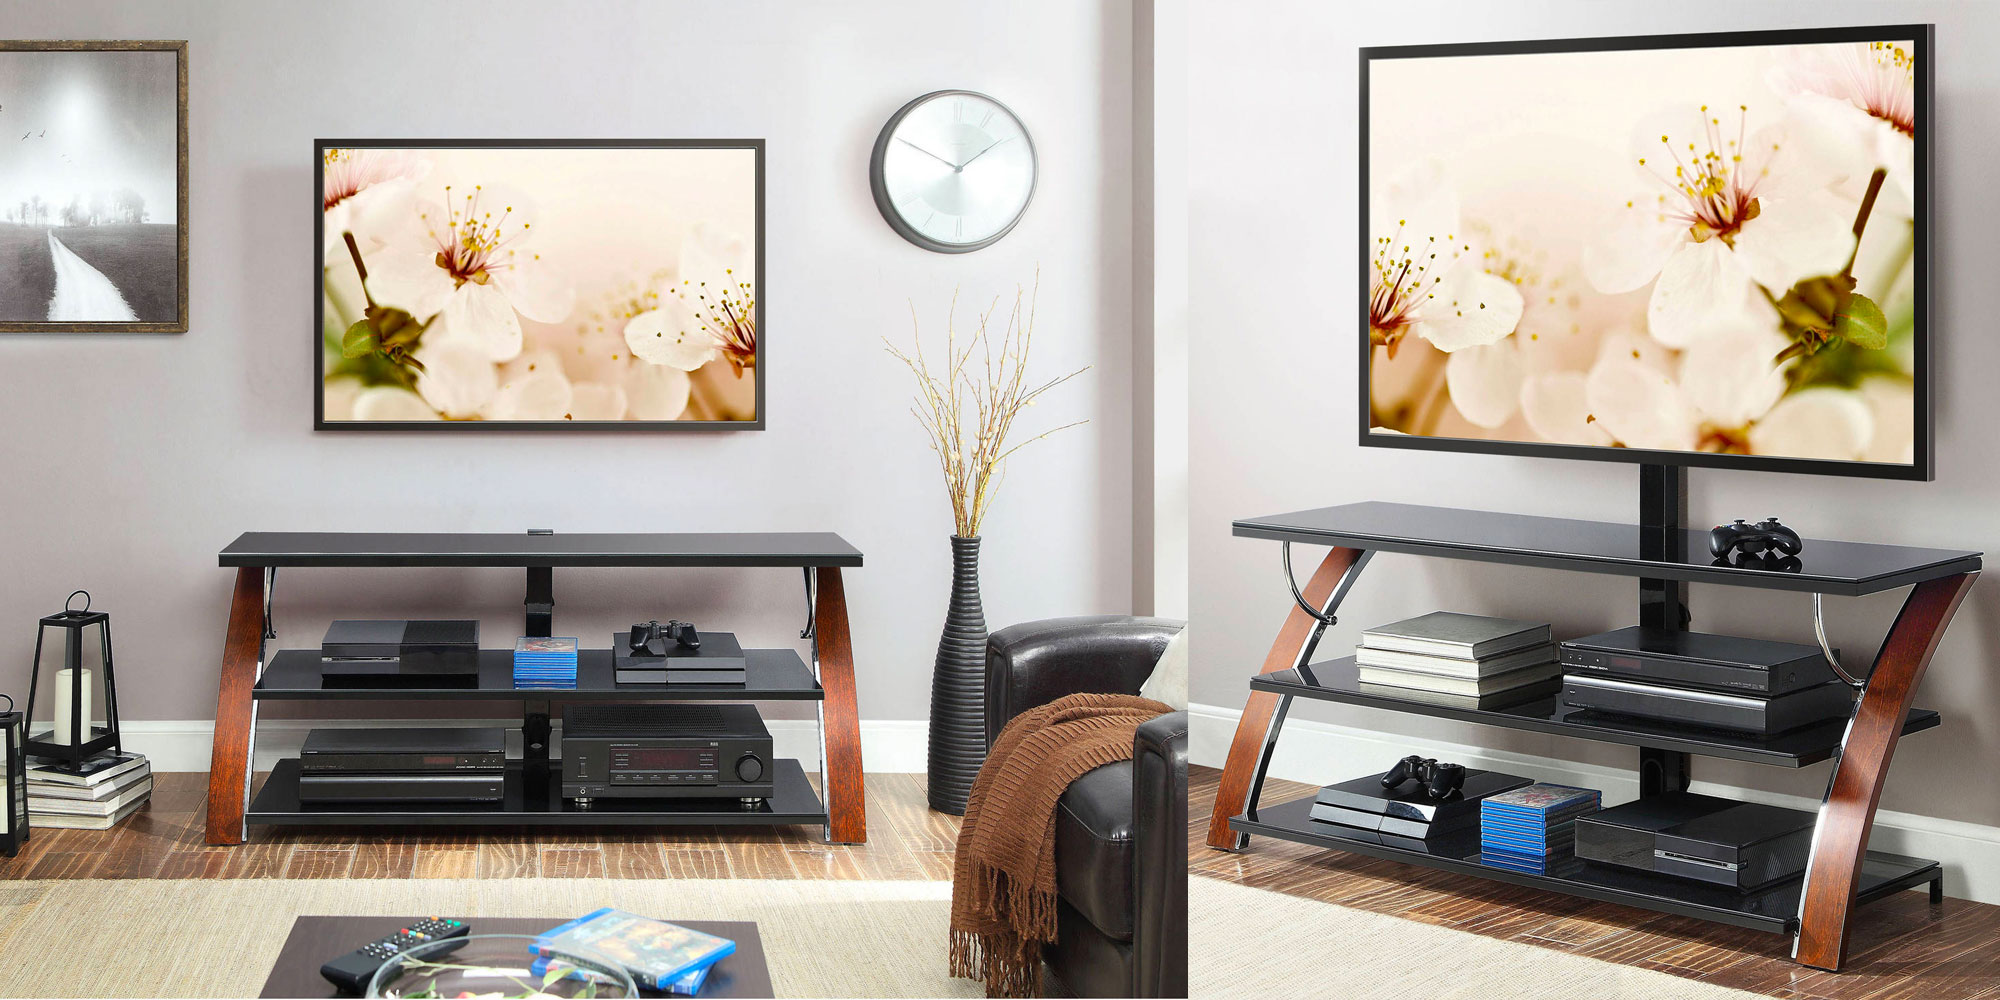 Whalen Payton 3-in-1 Flat Panel TV Stand for TVS up to 65 for sale online 